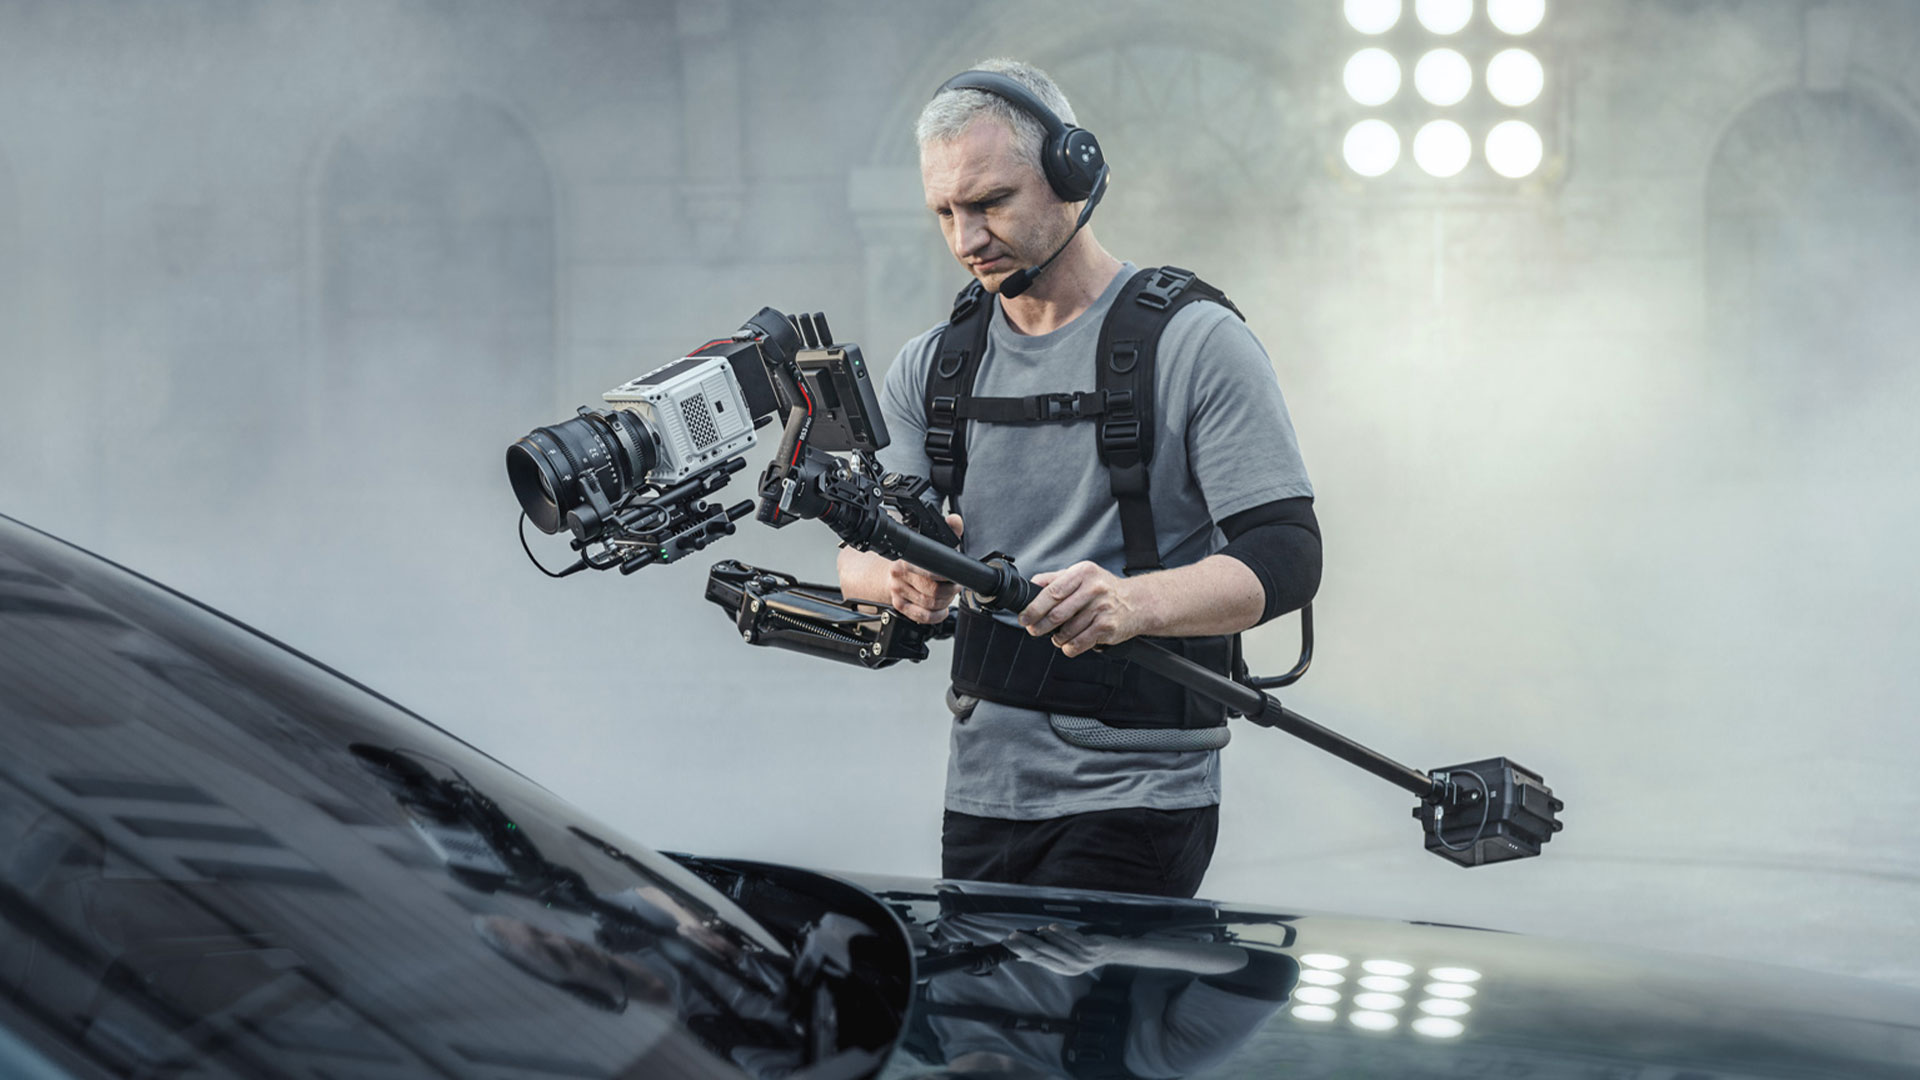 DJI RS 3 and RS 3 Pro Gimbals Announced - Same Payload, New Features, LiDAR  Focusing